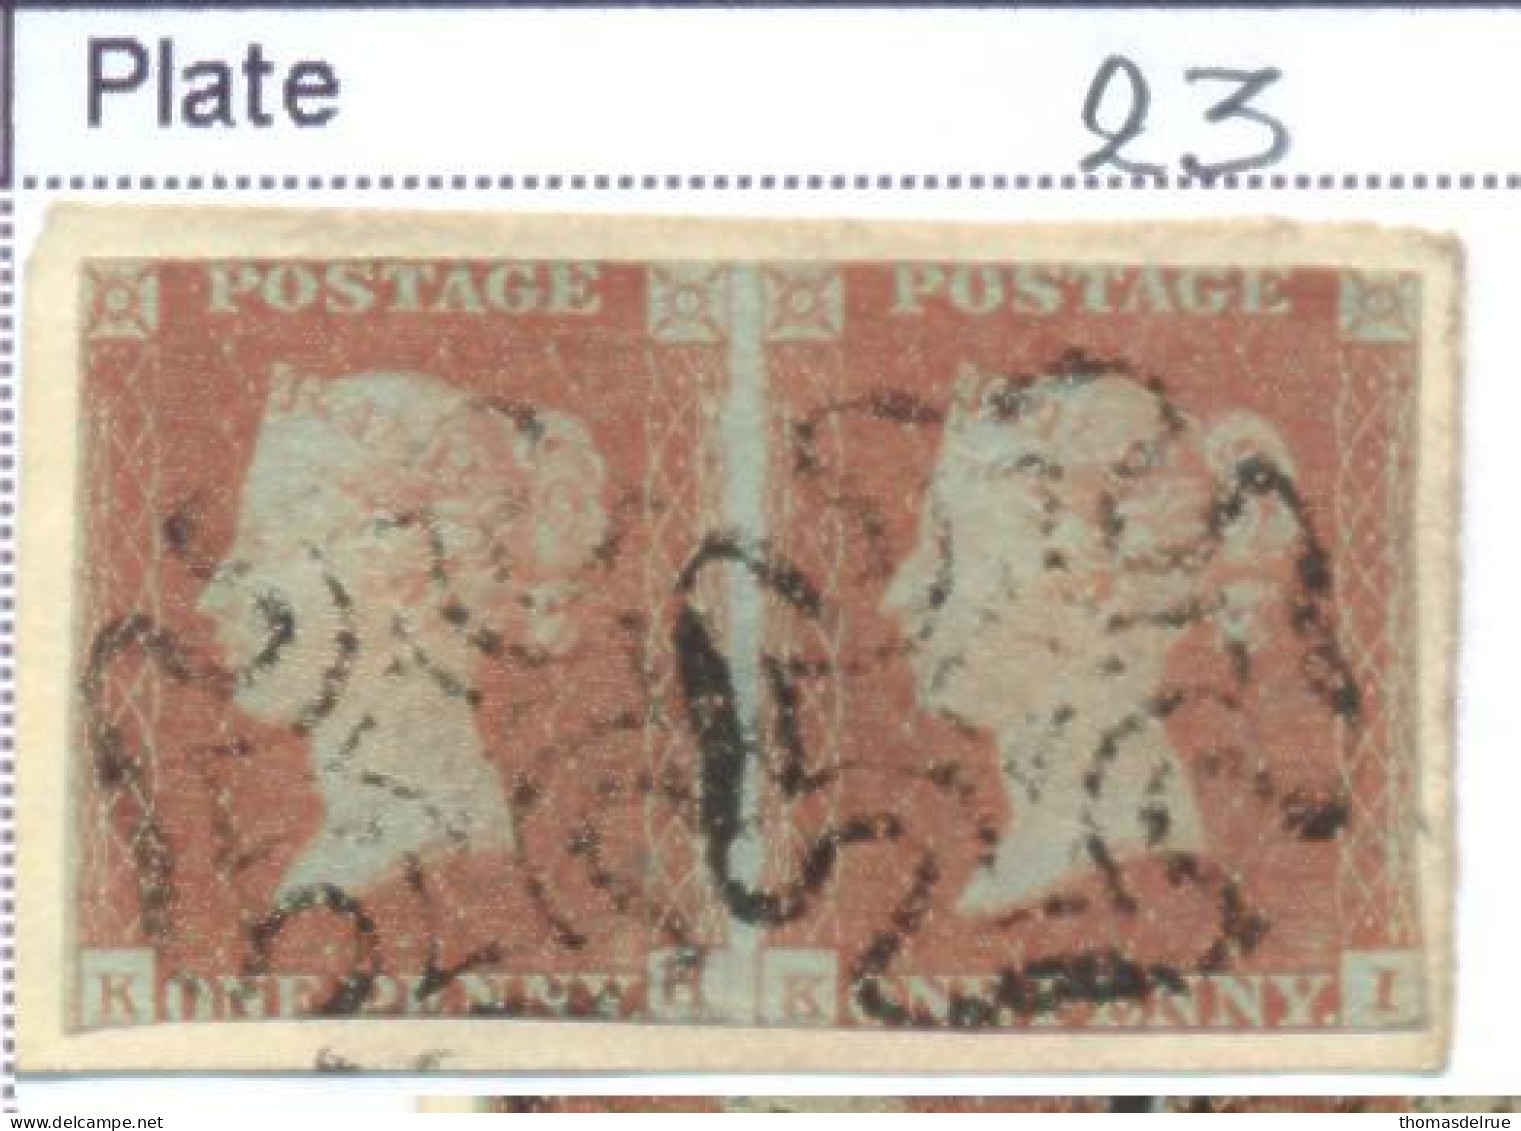 Ua674:  One Penny Red : Imperforated : K__H/I   - Plate 23 - Gebraucht